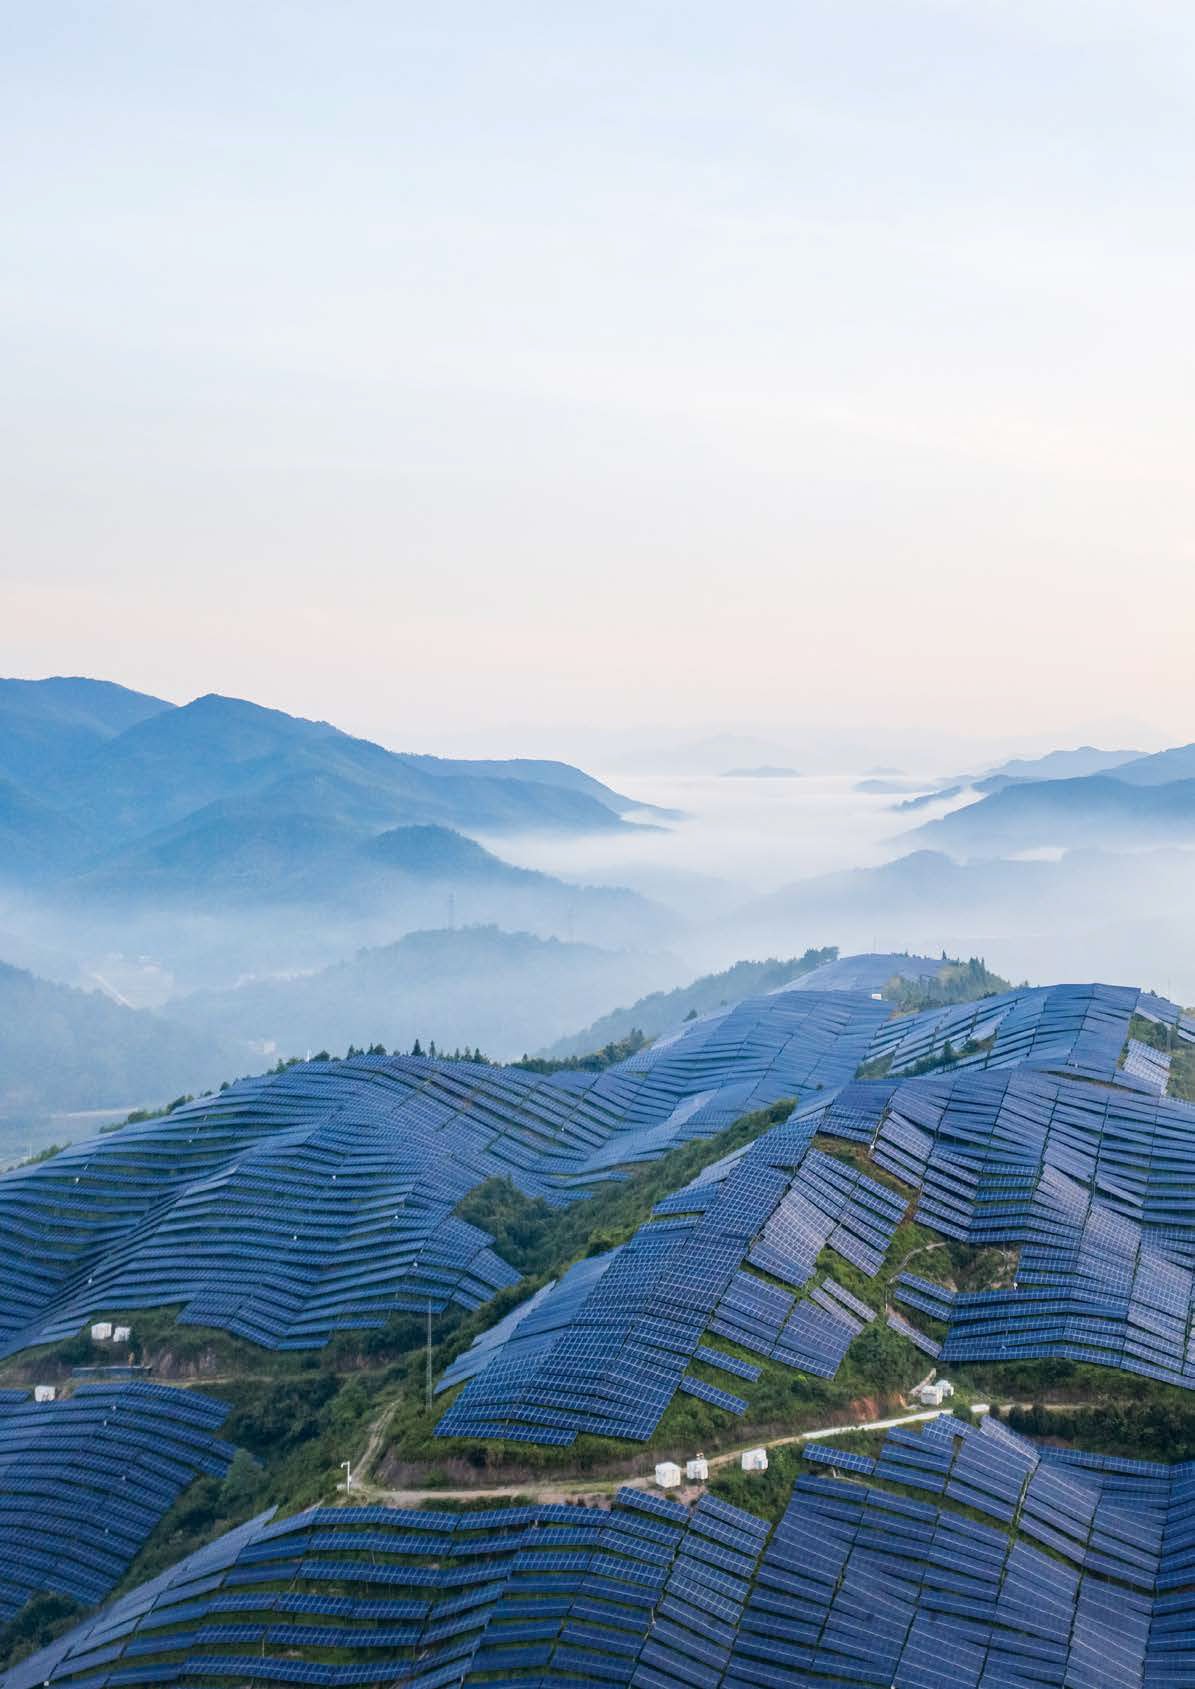 solar panels on a hill with a mountain backdrop